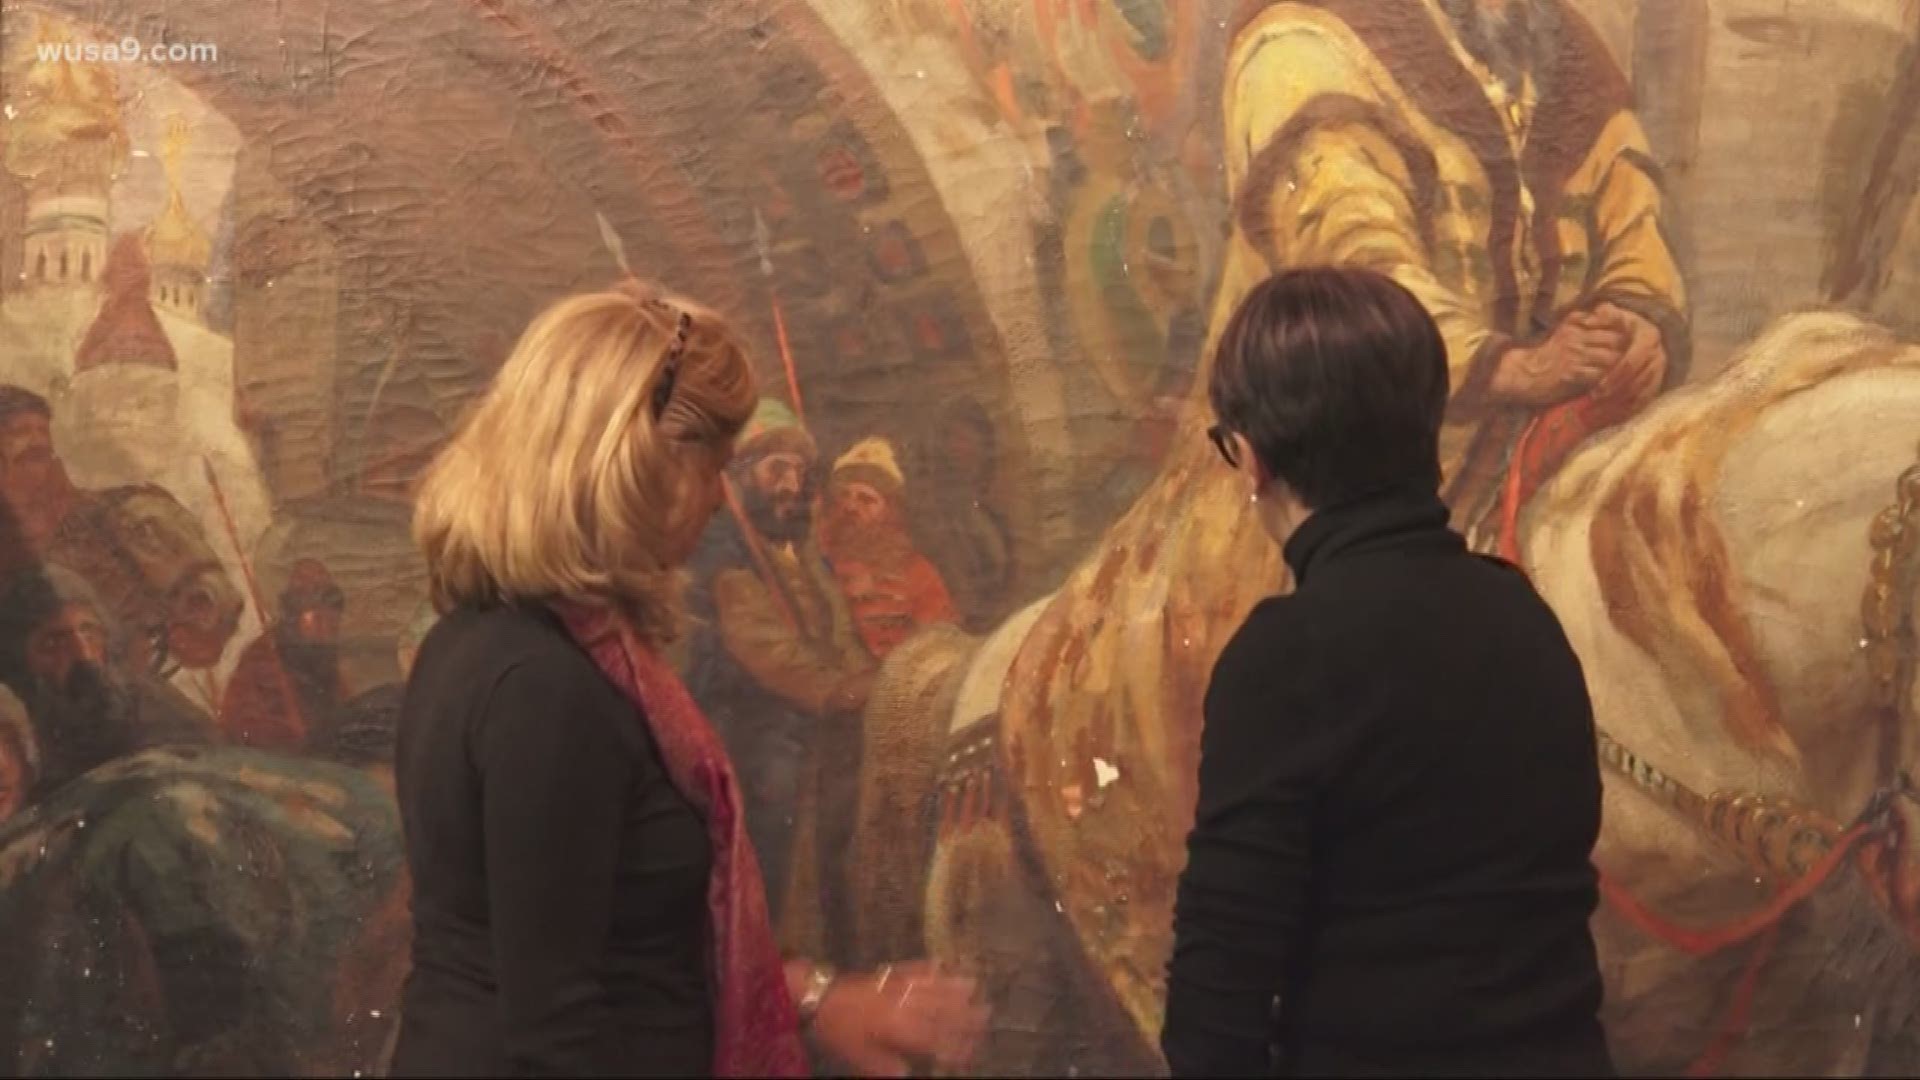 The painting's owners in Ukraine are going to get it back.